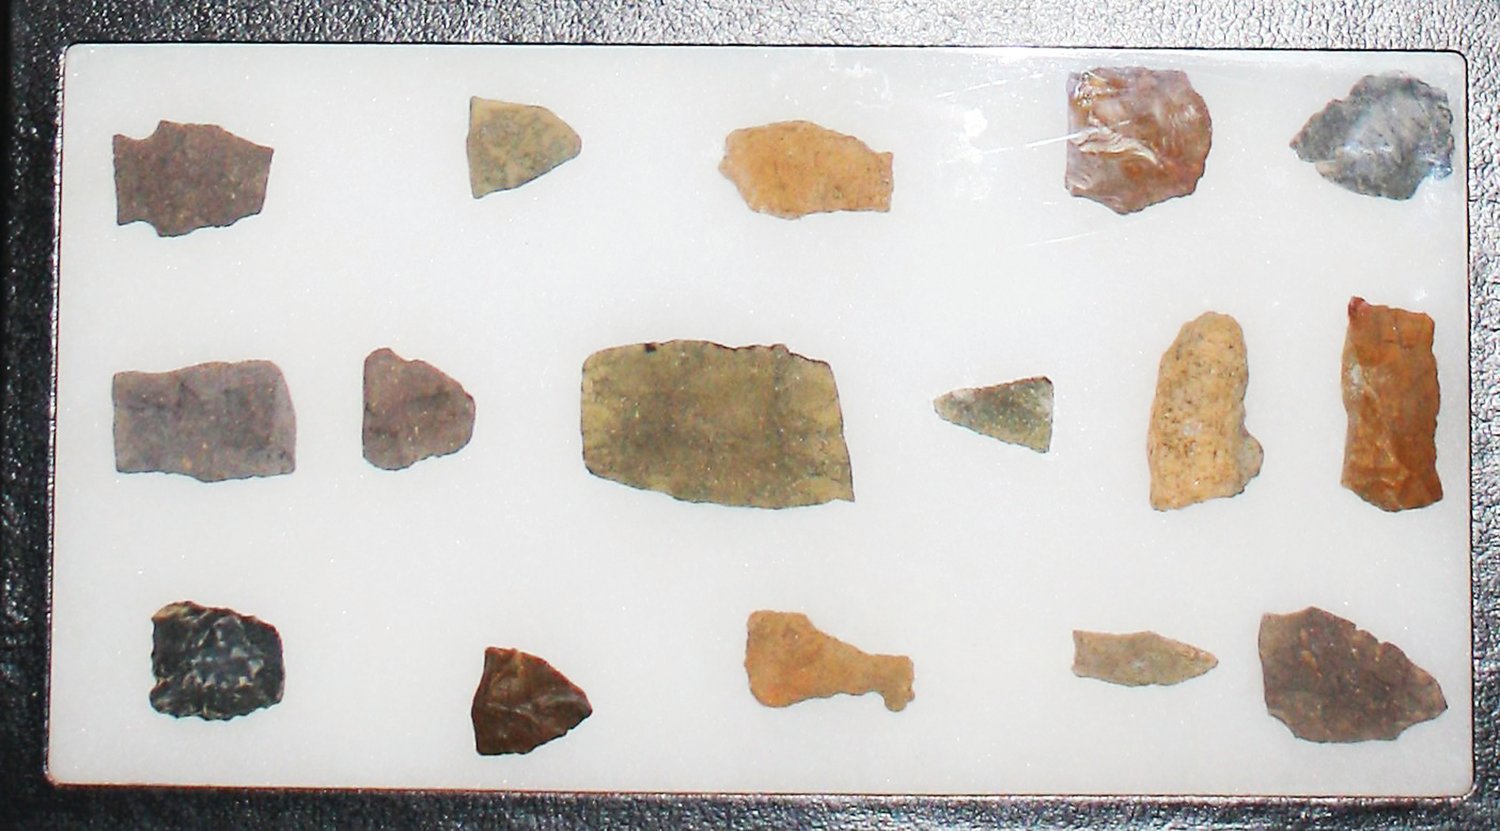 These are some of the Lenni Lenape artifacts Kevin Kline has found in Durham Township. Photograph by Kathryn Finegan Clark.